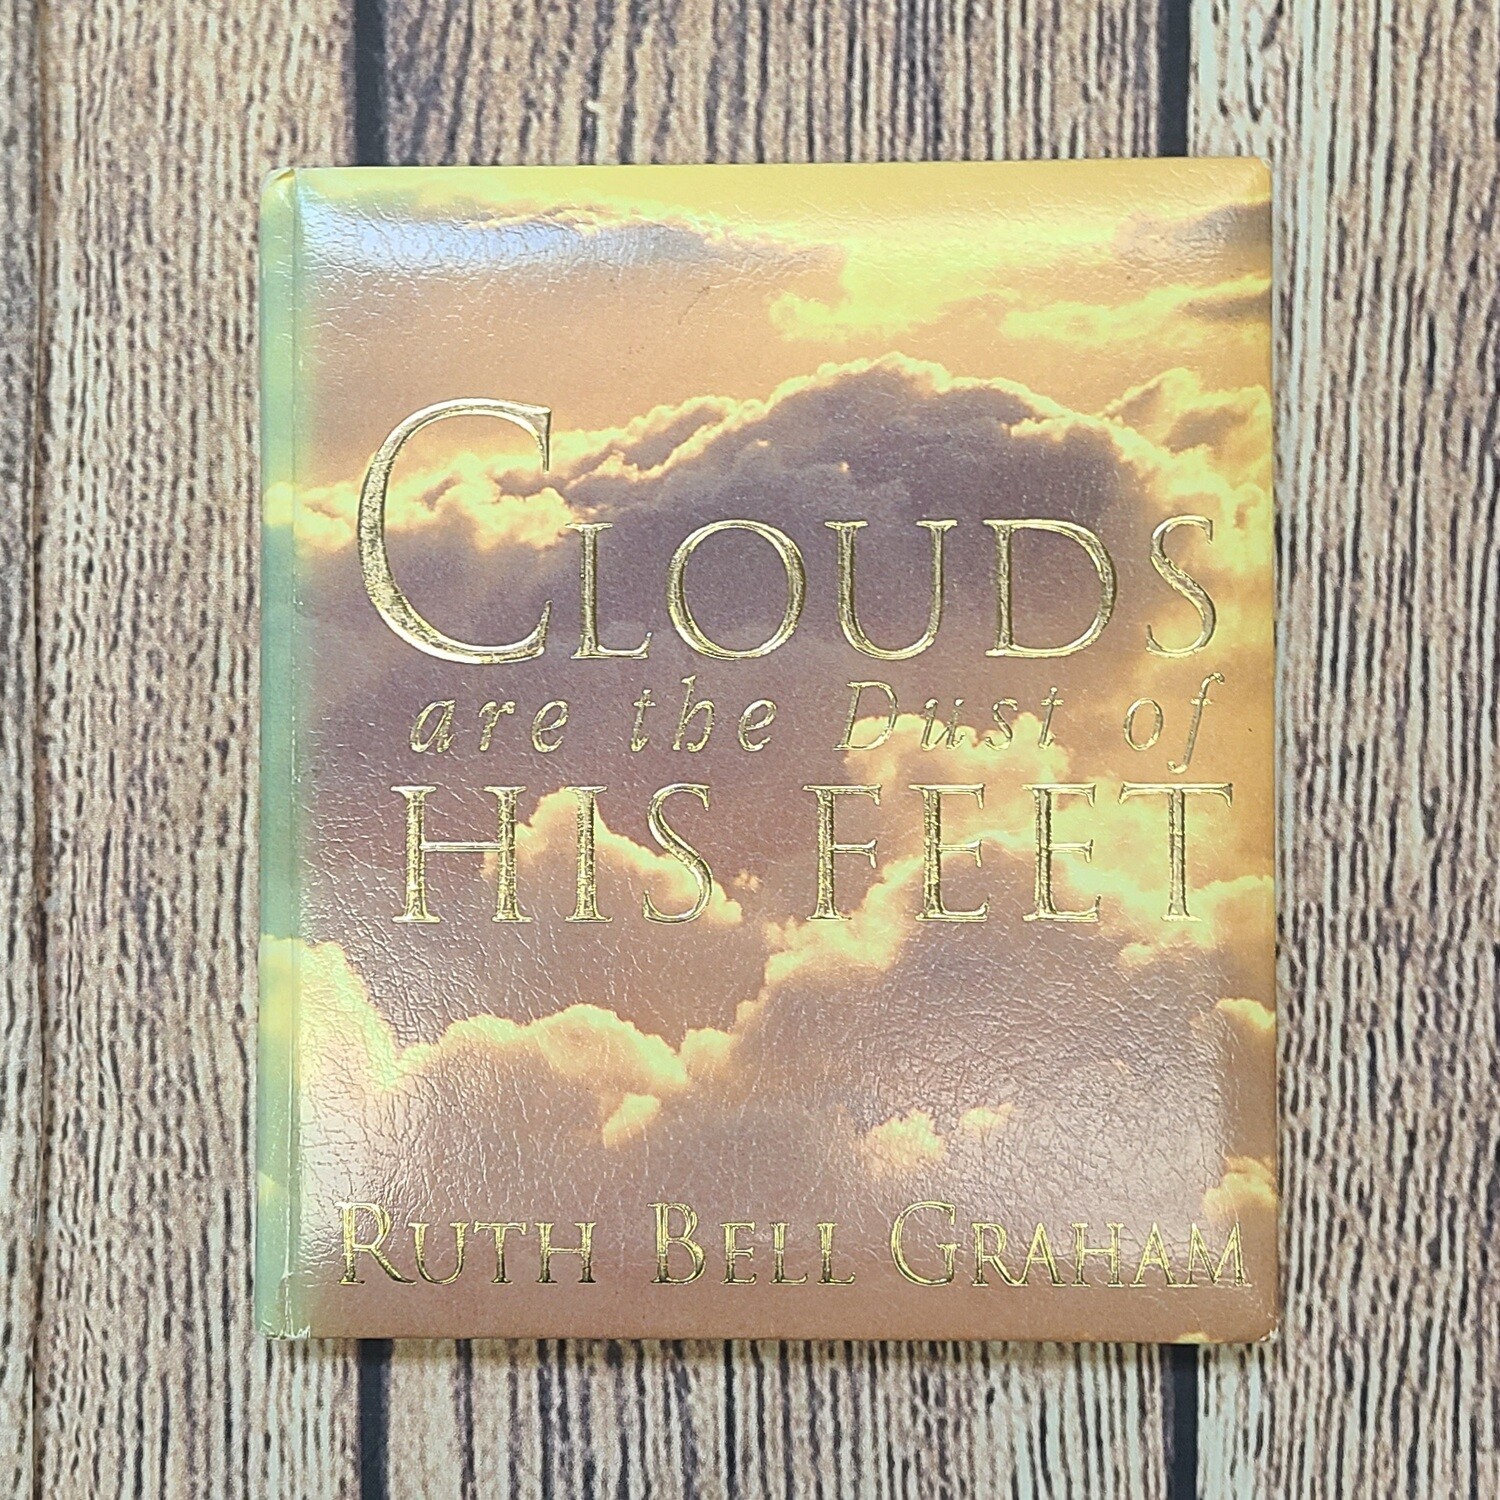 Clouds are the Dust of HIs Feet by Ruth Bell Graham